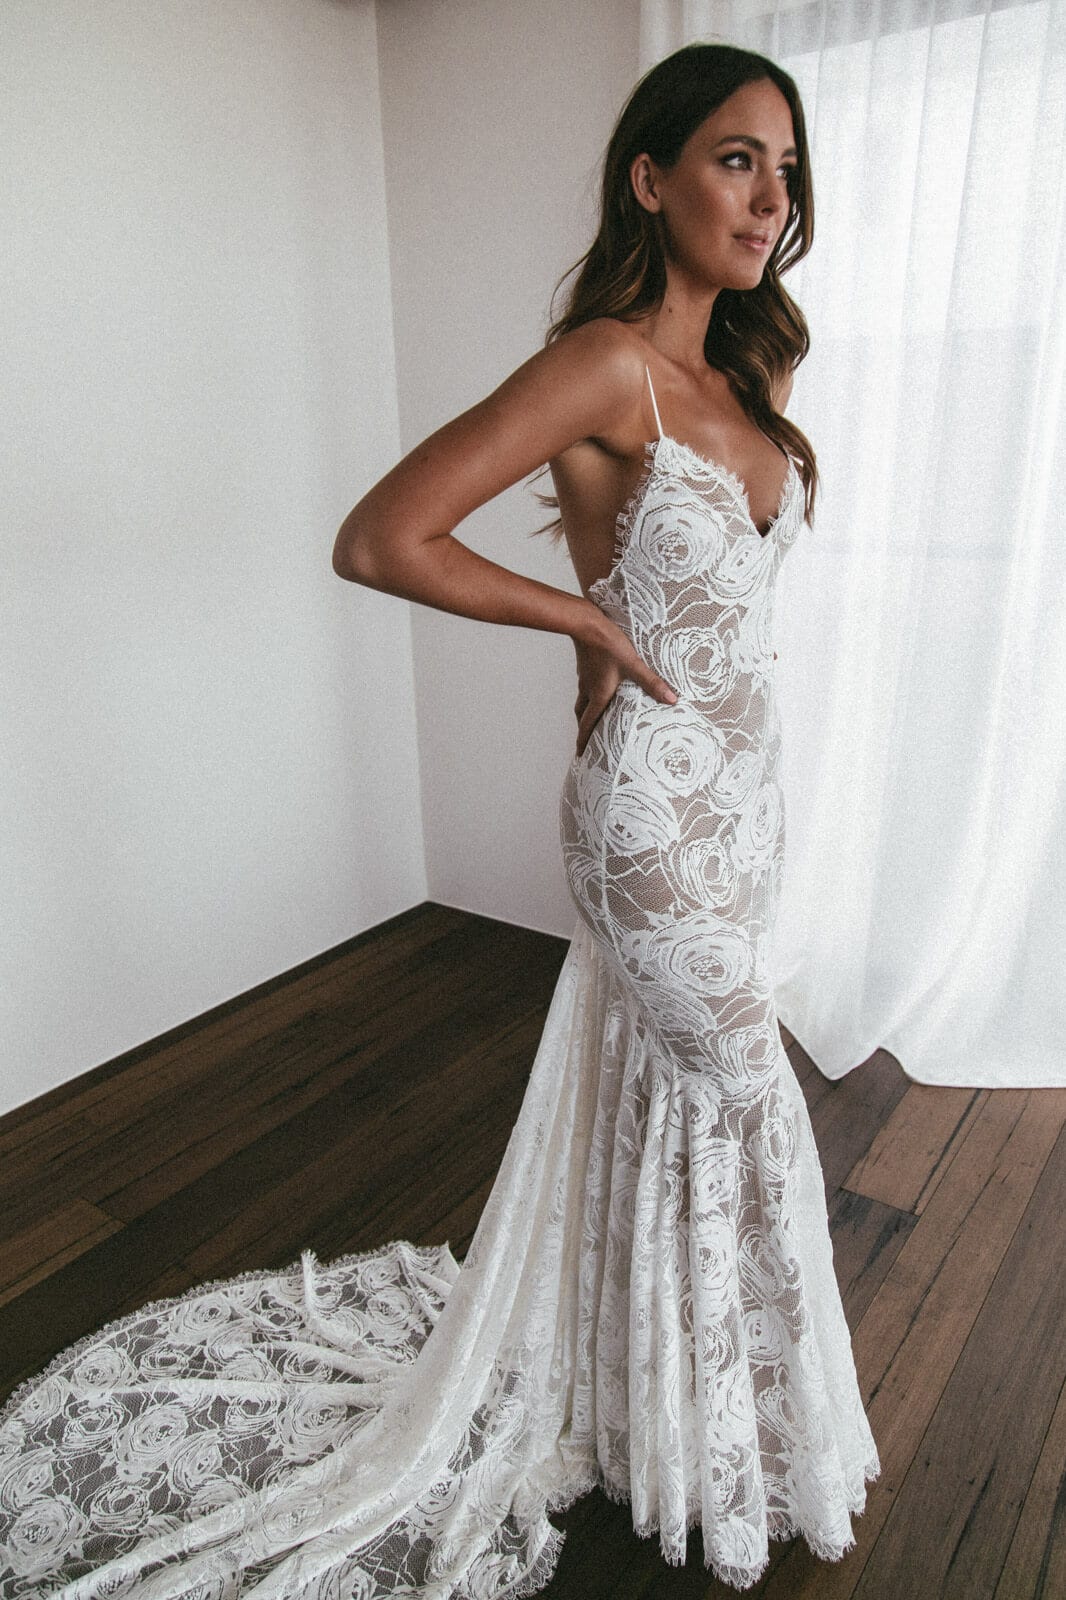 Clo Gown | Lace Wedding Dress | Made to Order Standard